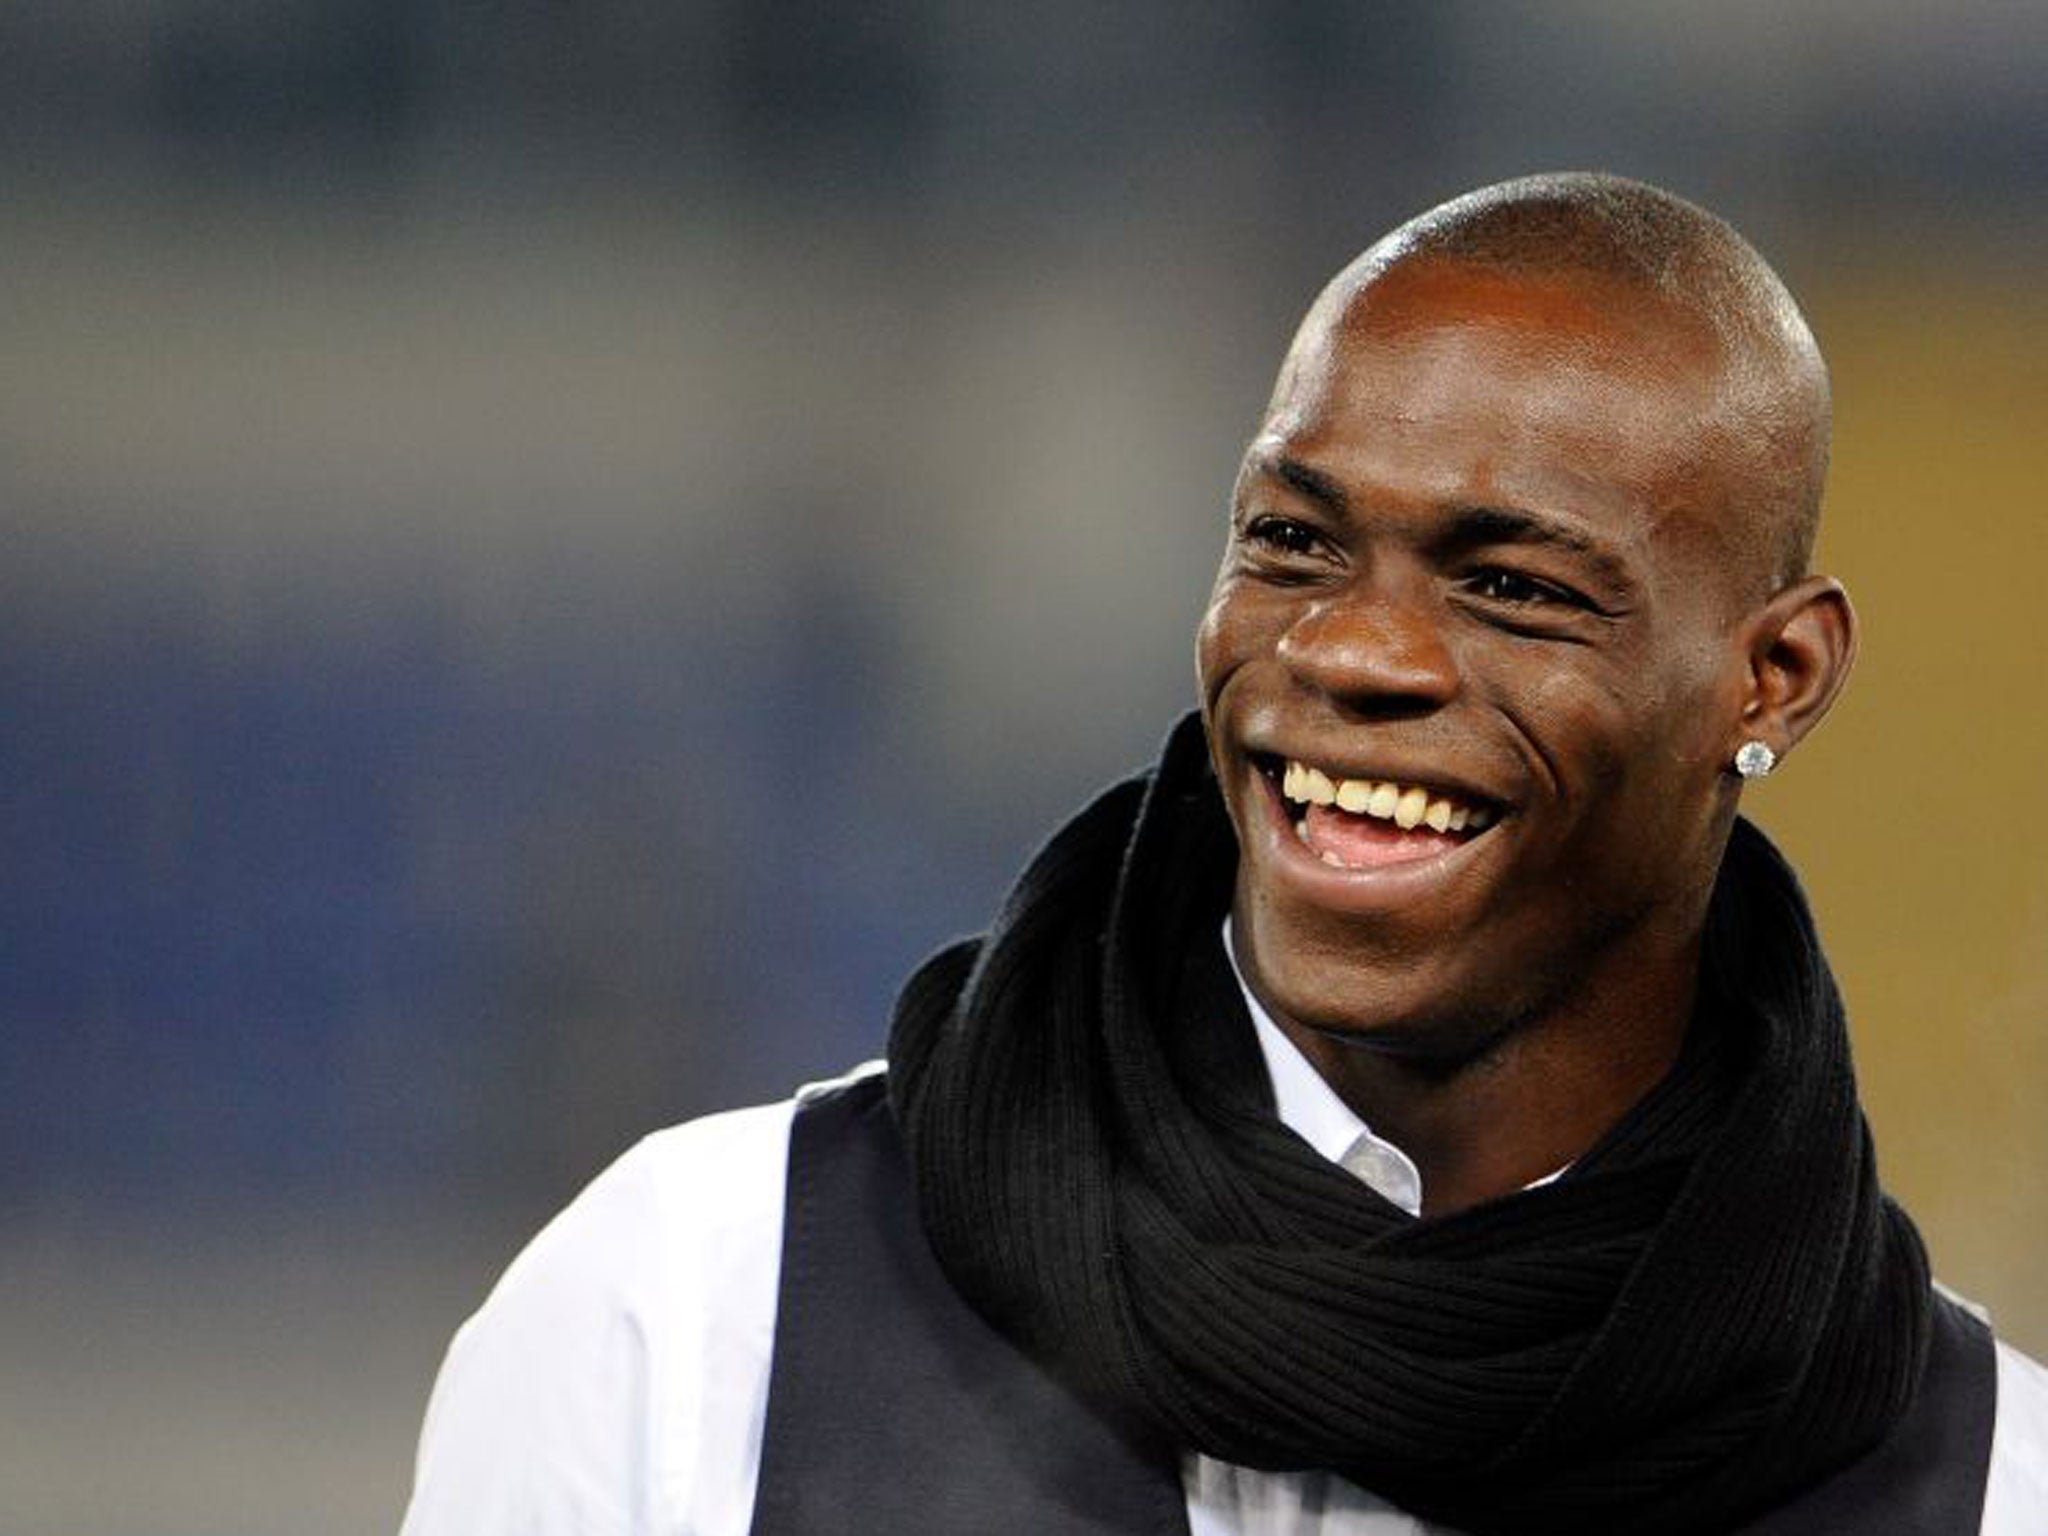 This week Manchester City striker Mario Balotelli became a father for the first time when his former partner Raffaella Fico gave birth to their daughter Pia